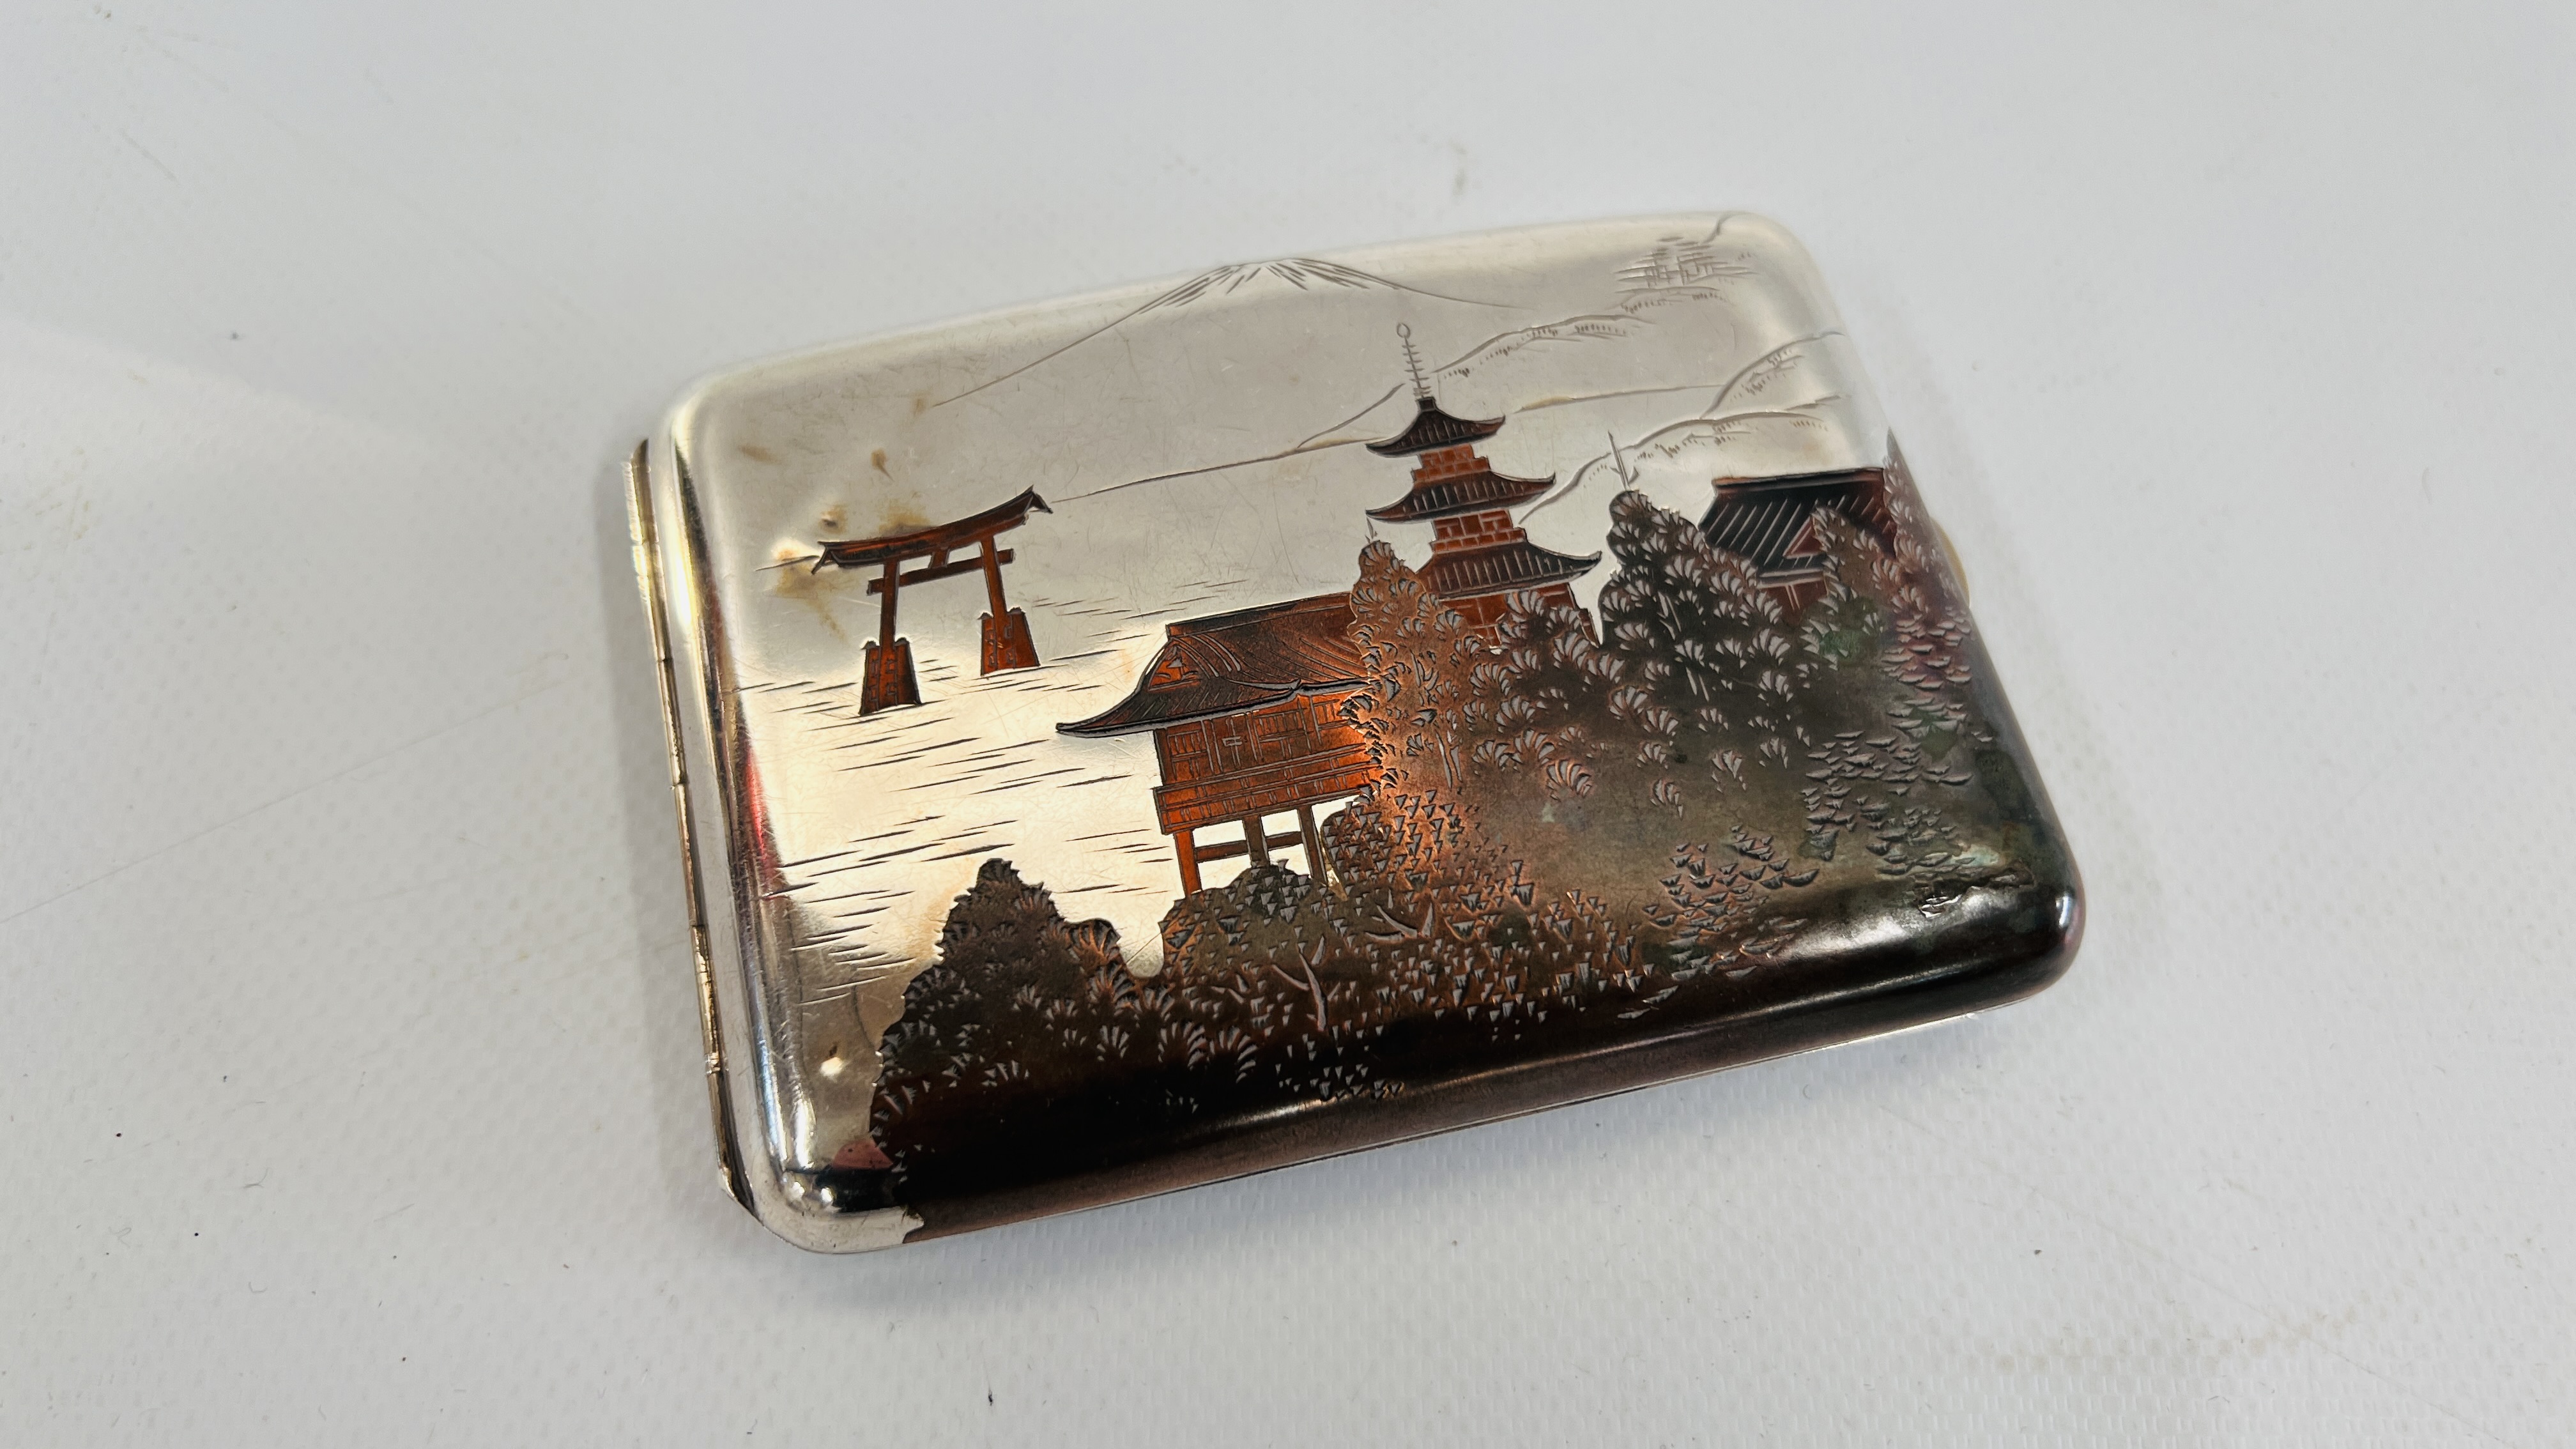 A JAPANESE STYLE SILVER AND MIXED METAL CIGARETTE CASE. L 11.5CM. X H 8CM.